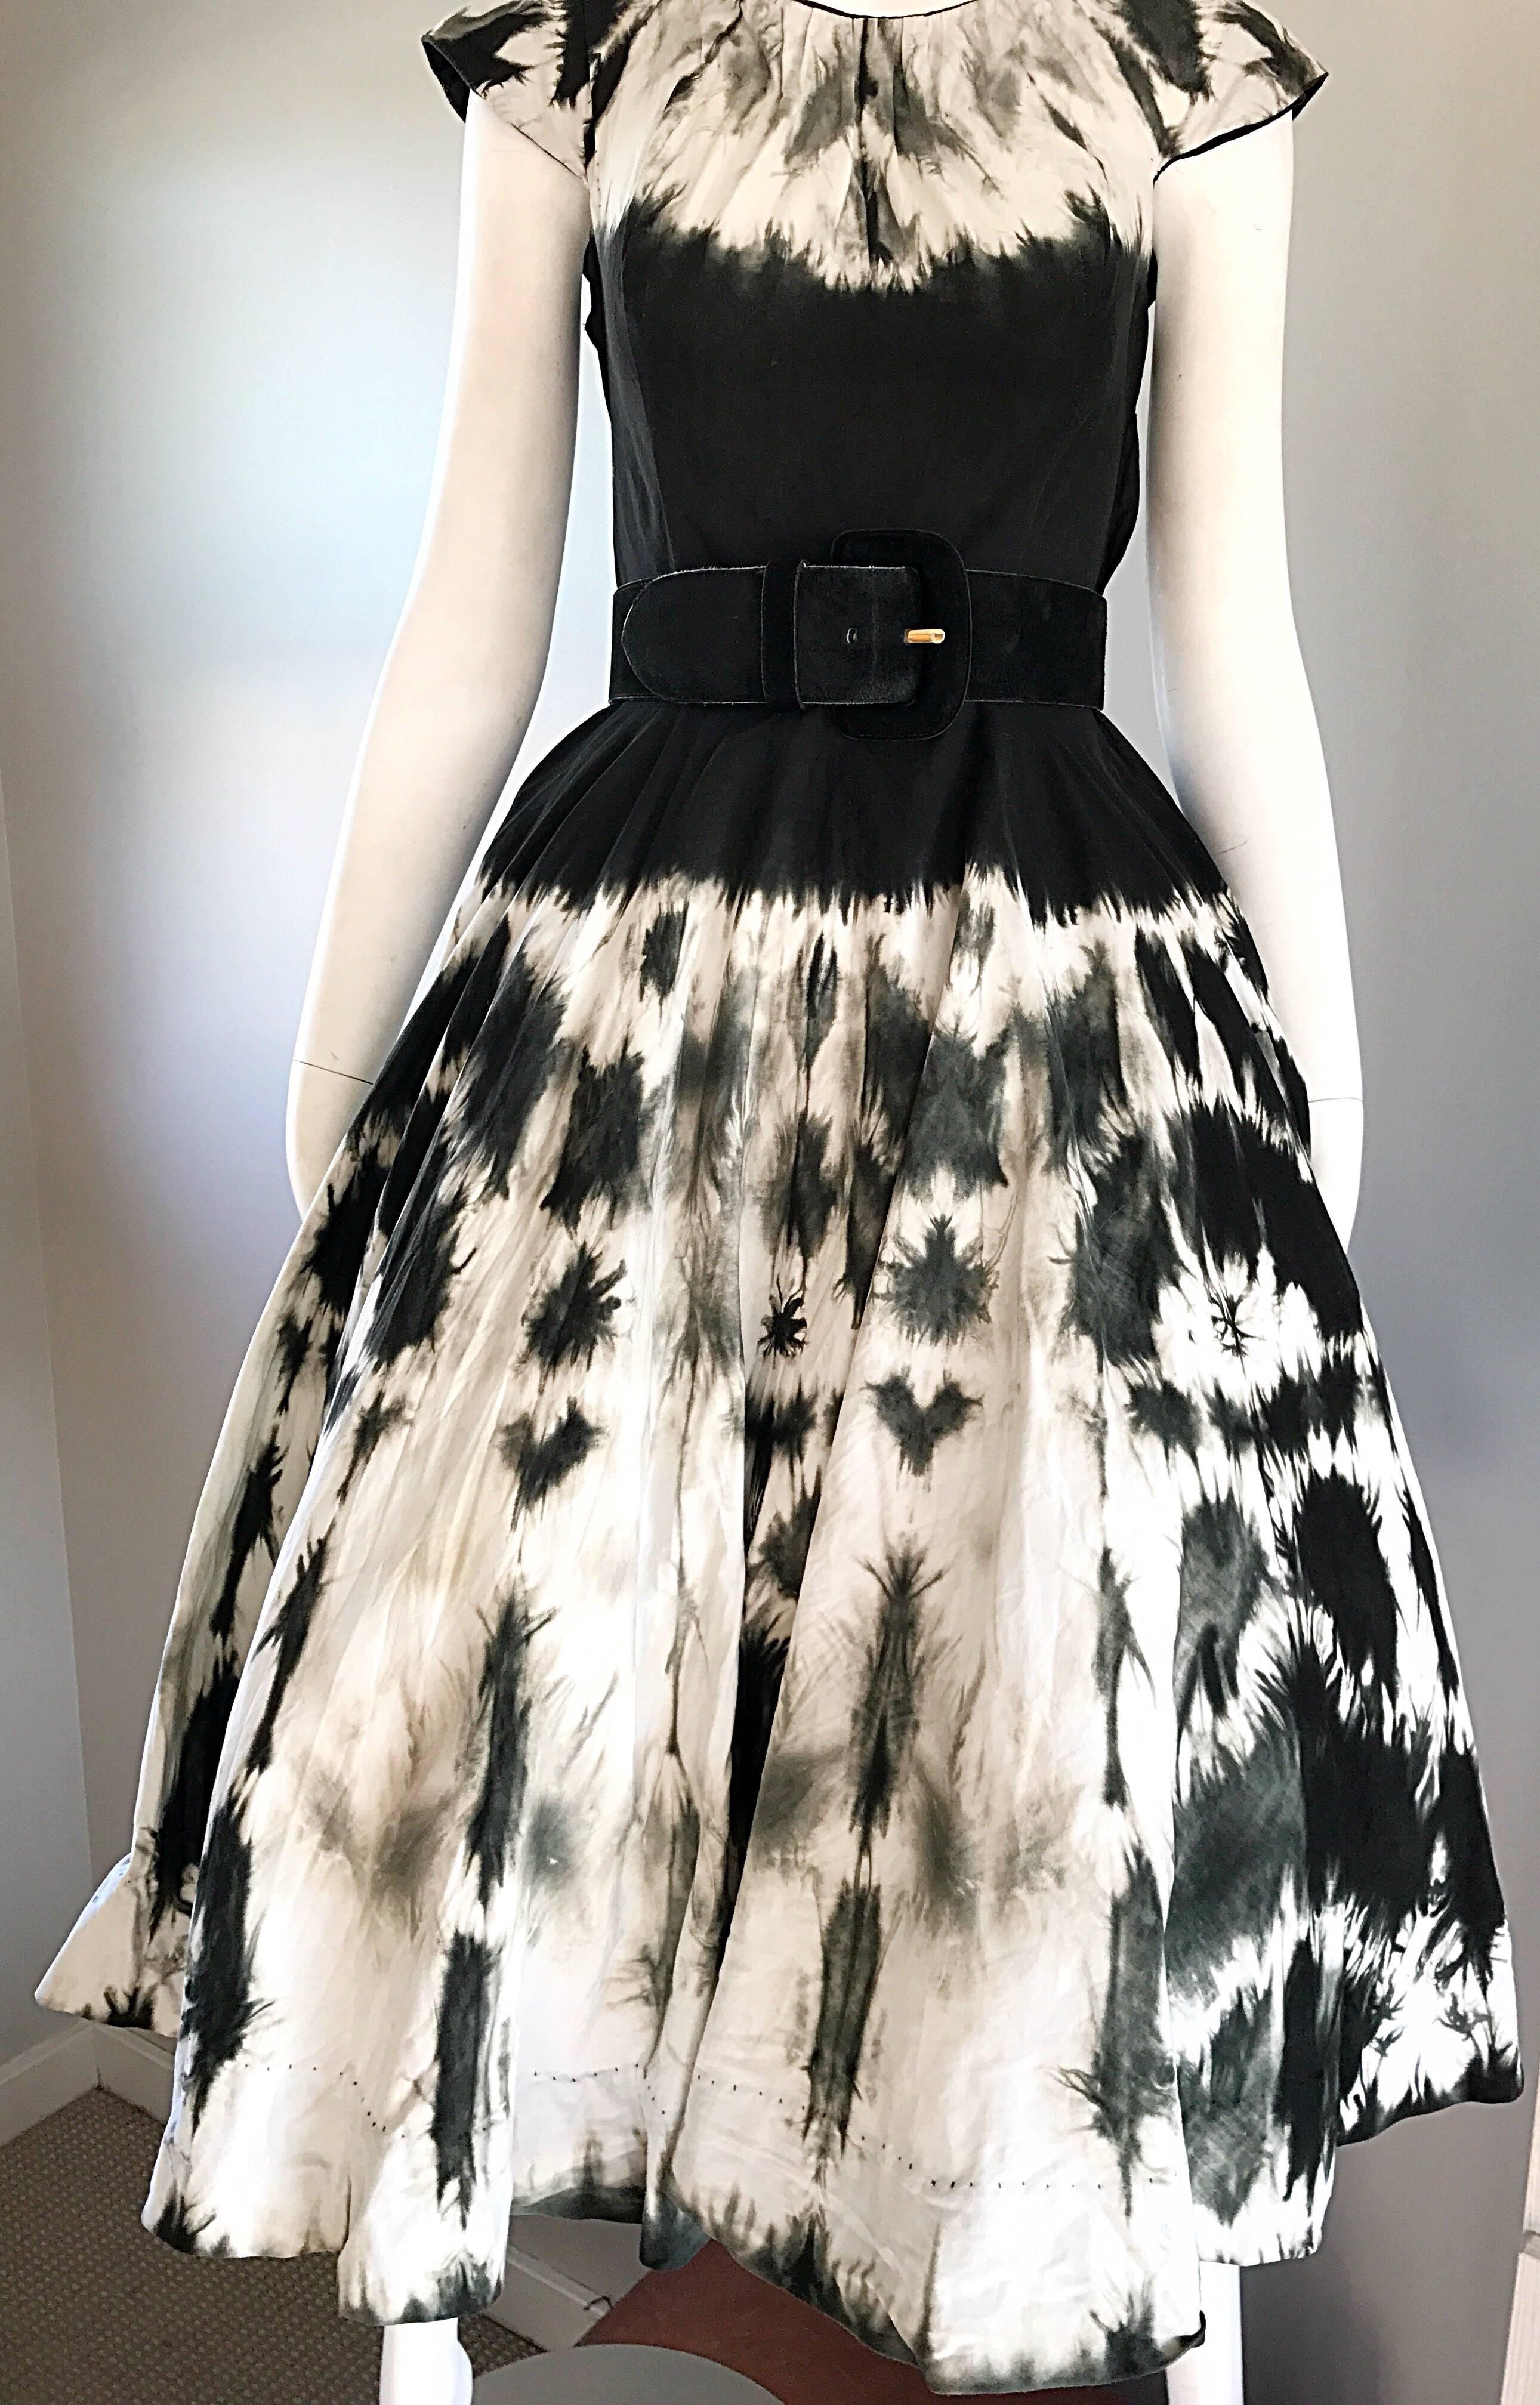 Women's 1950s Madalyn Miller 1950s Black and White Tie Dye Cotton Chic Vintage 50s Dress